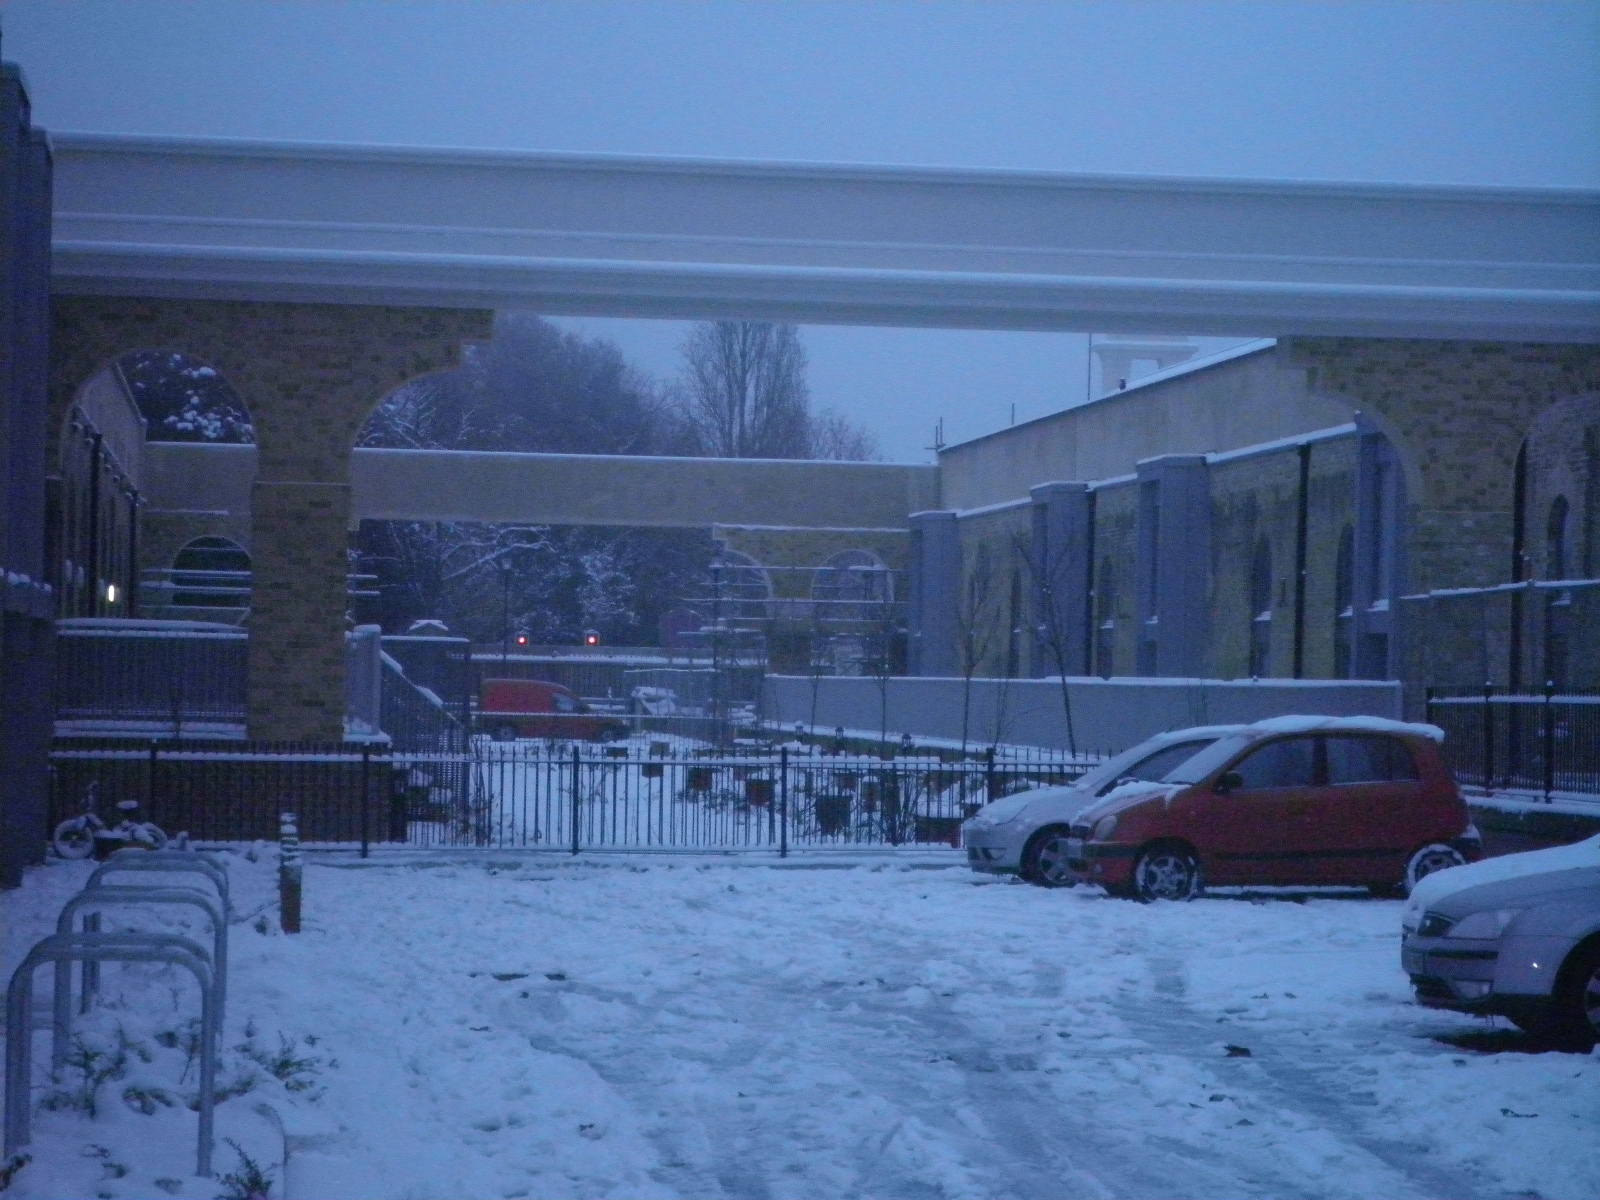 Gosport station in the snow